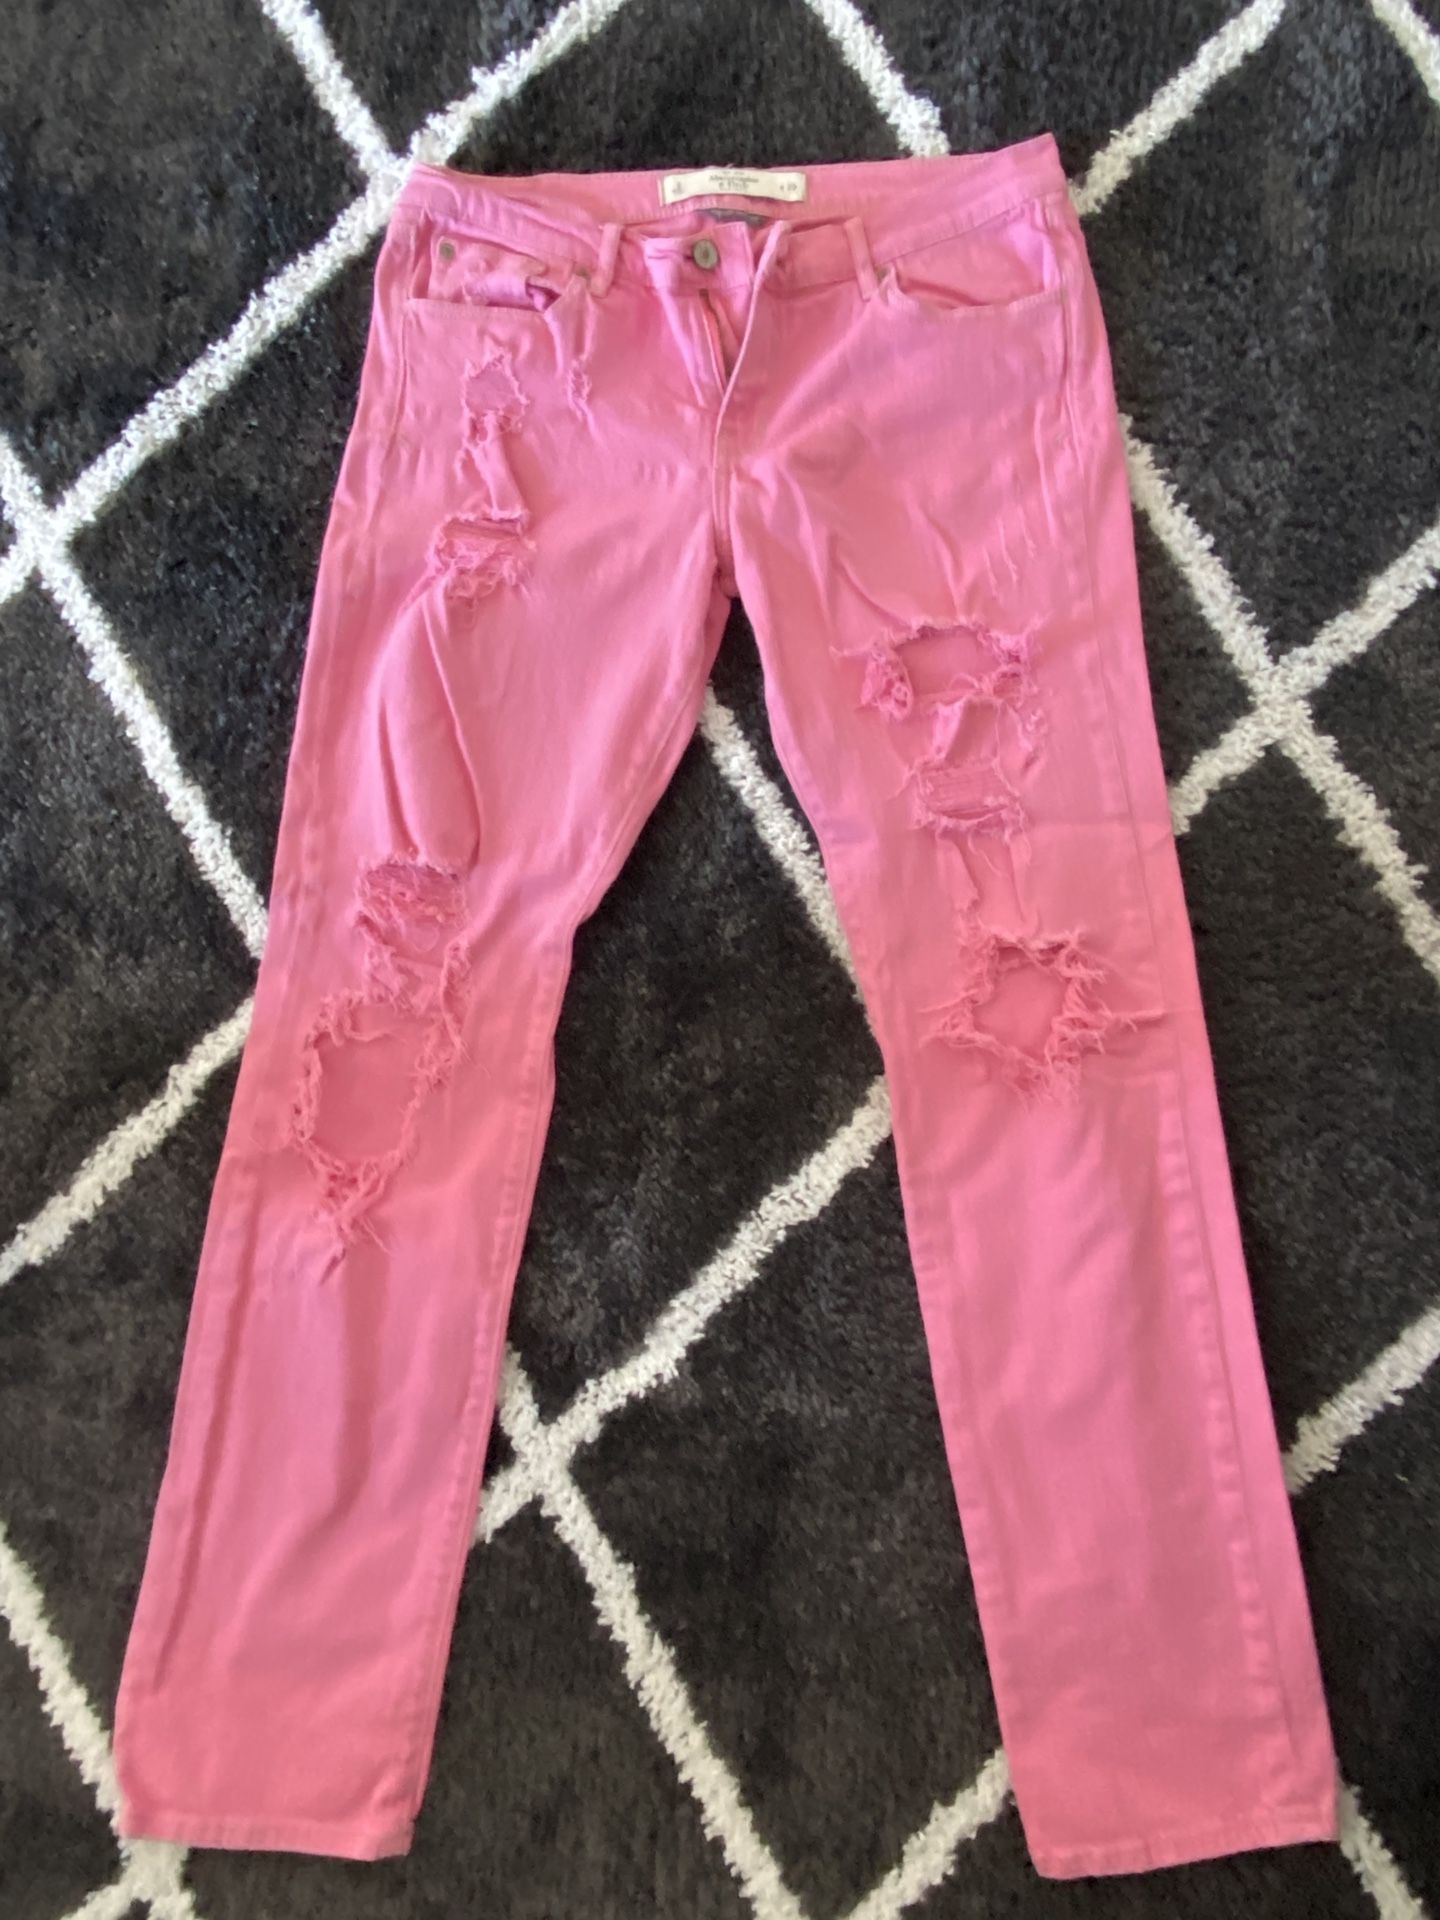 Women Abercrombie Hot Pink Jeans with Rips size 29 skinny/stretch